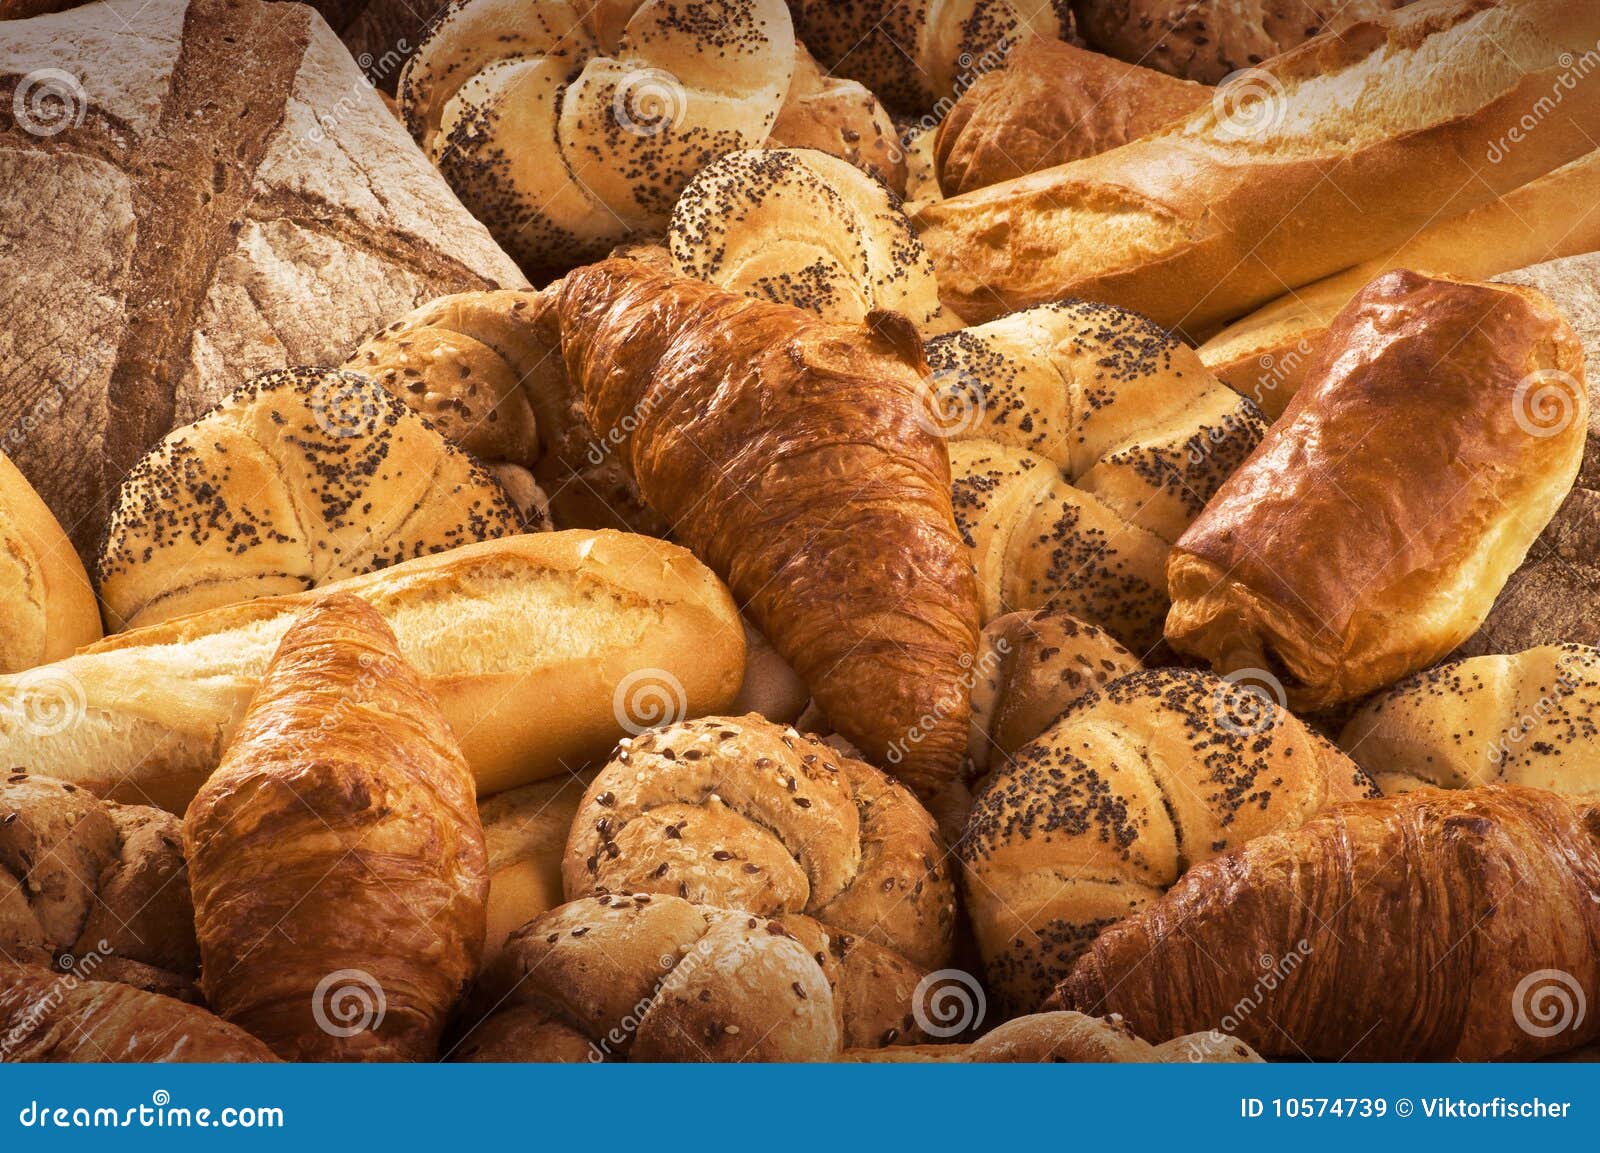 variety of fresh bread and pastry